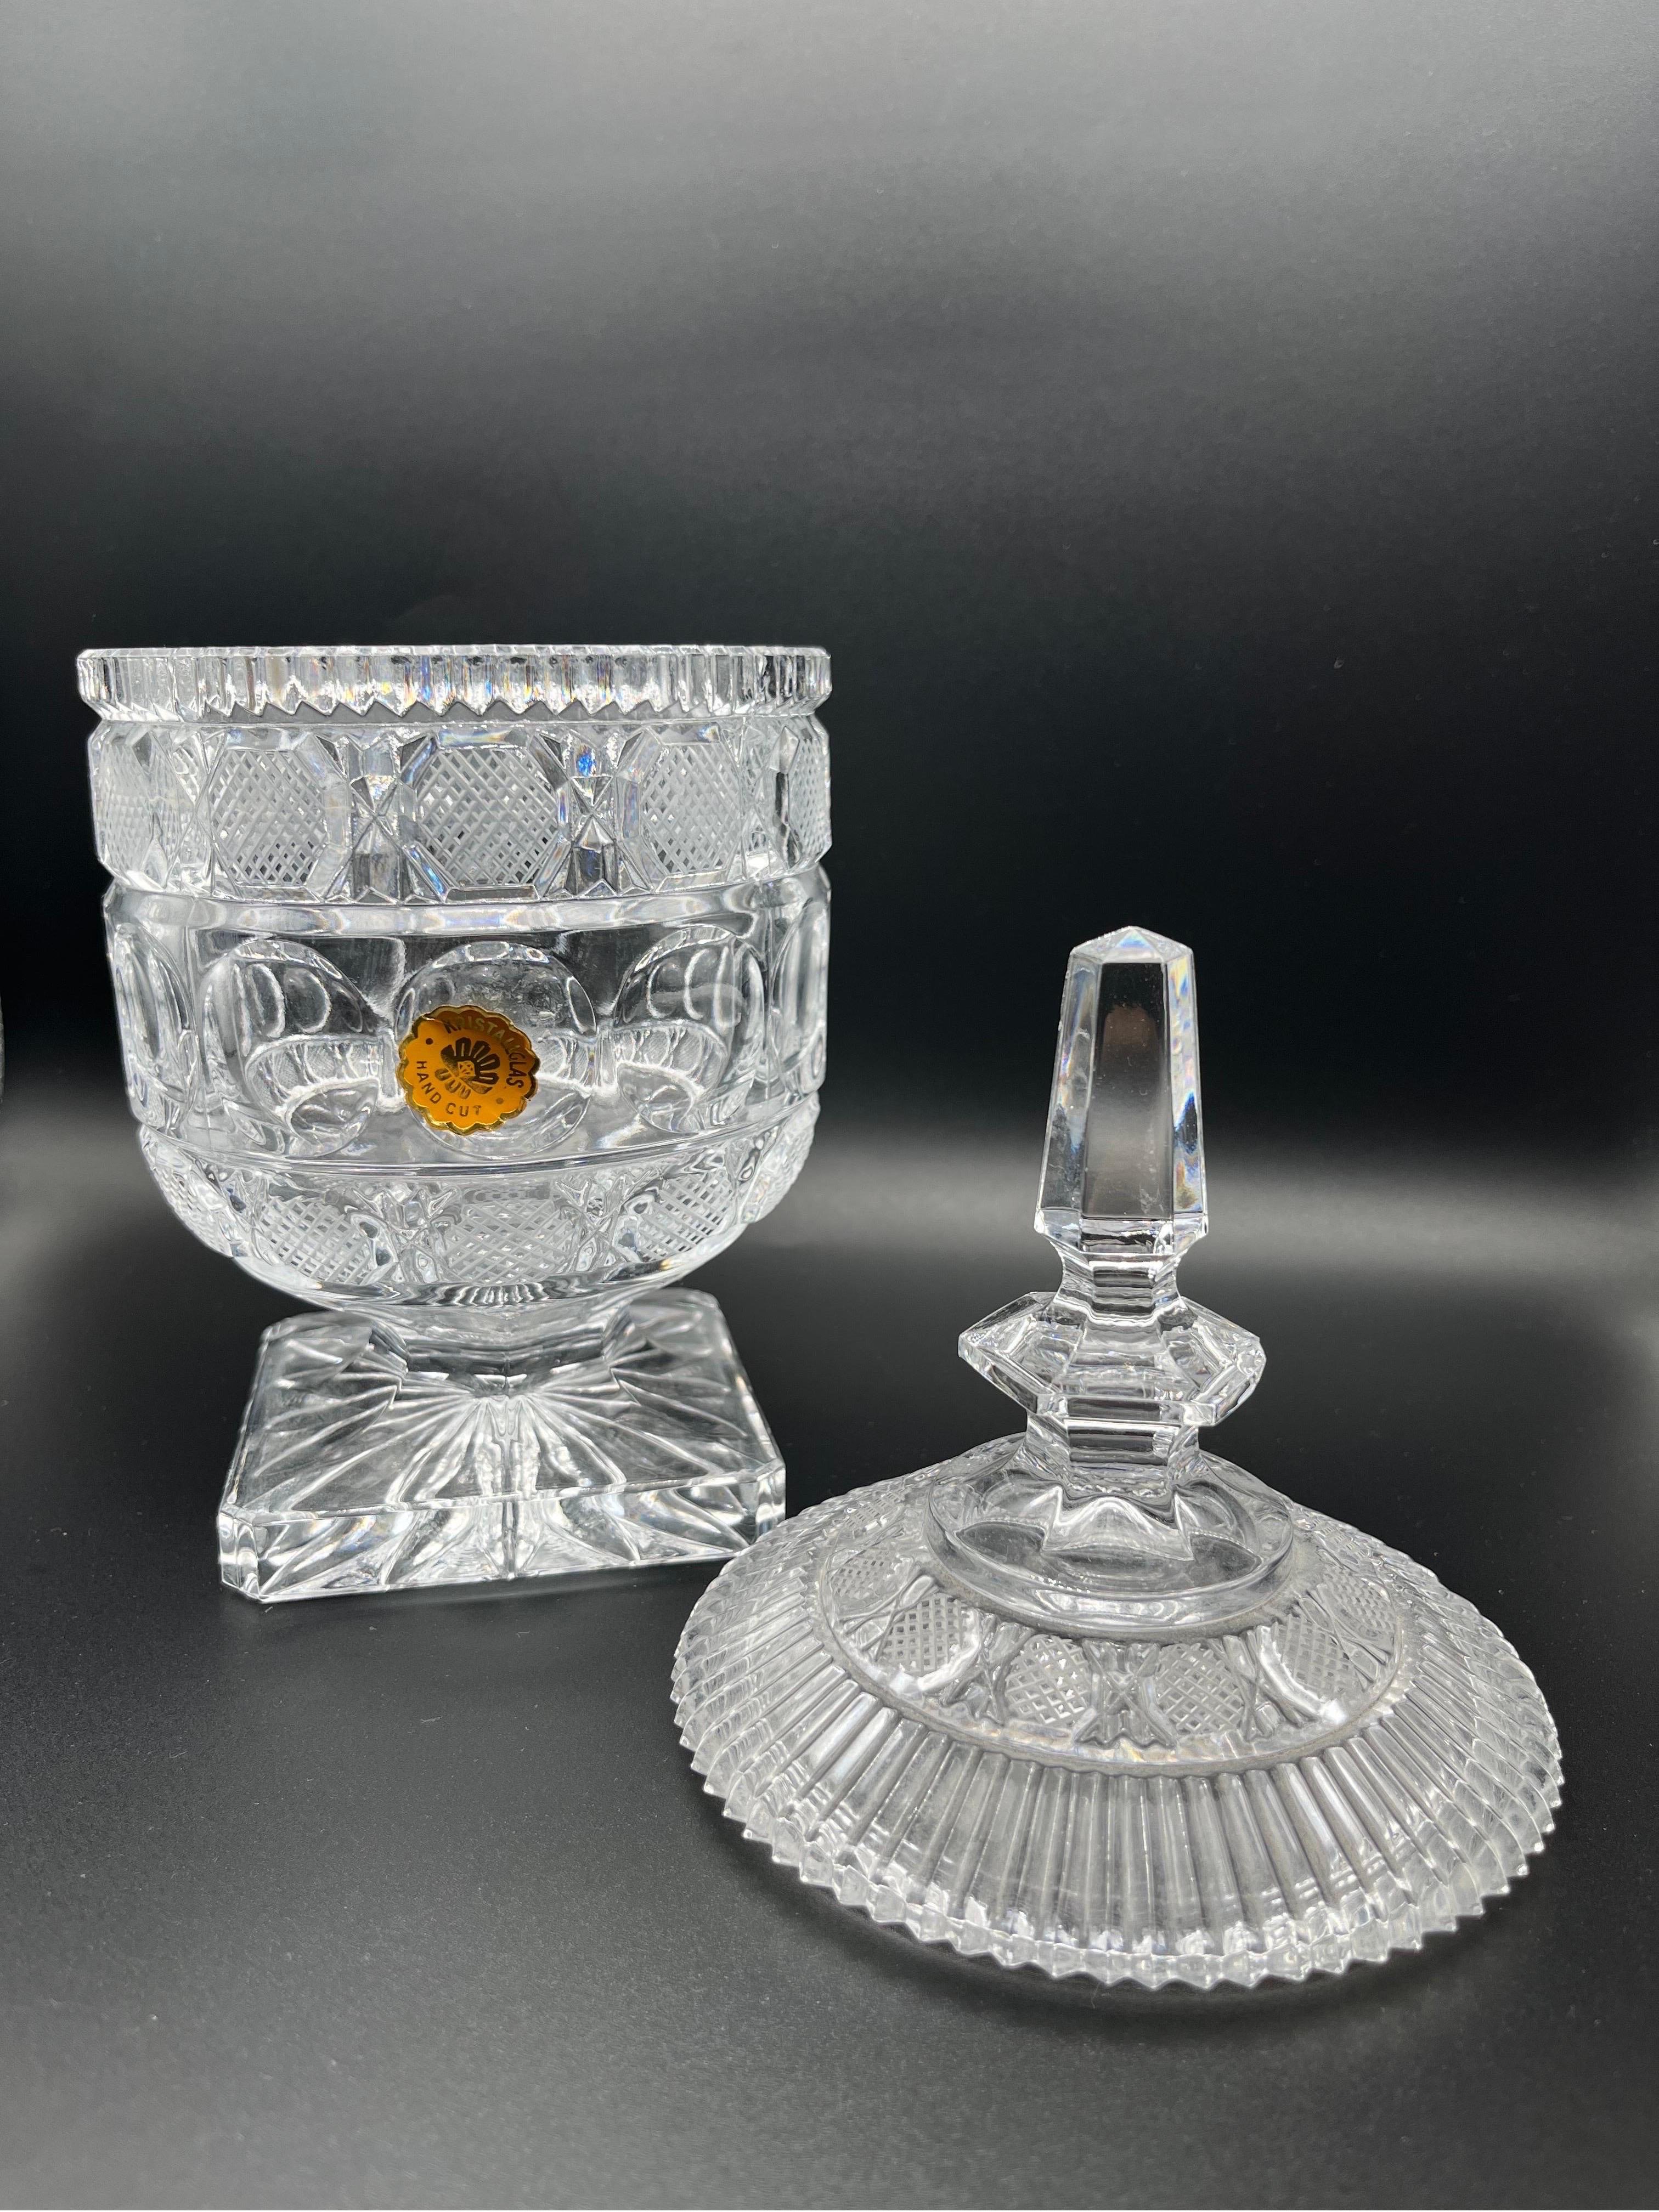 Bohemia Crystal Chocolate Holder, 1900 Antiques In Good Condition For Sale In Foggia, FG